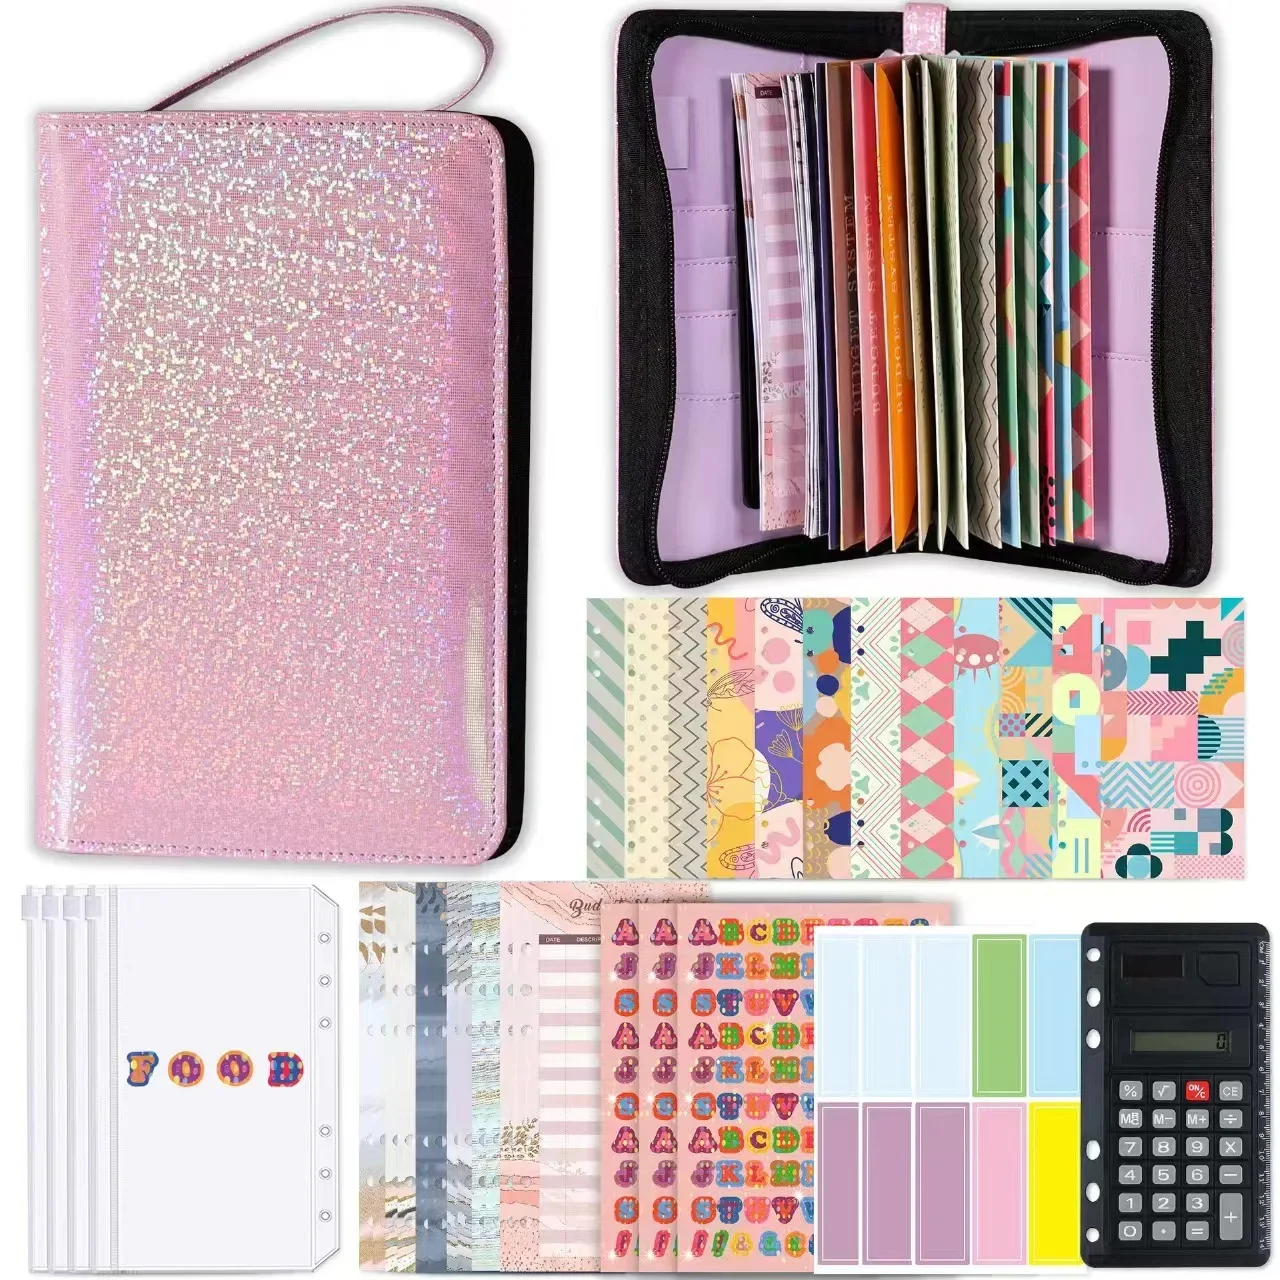 

Binder Notepad Office And Book With Note Calculator Planner Journal Zipper Notebook Agenda Diary Padfolio Ring Sketchbook